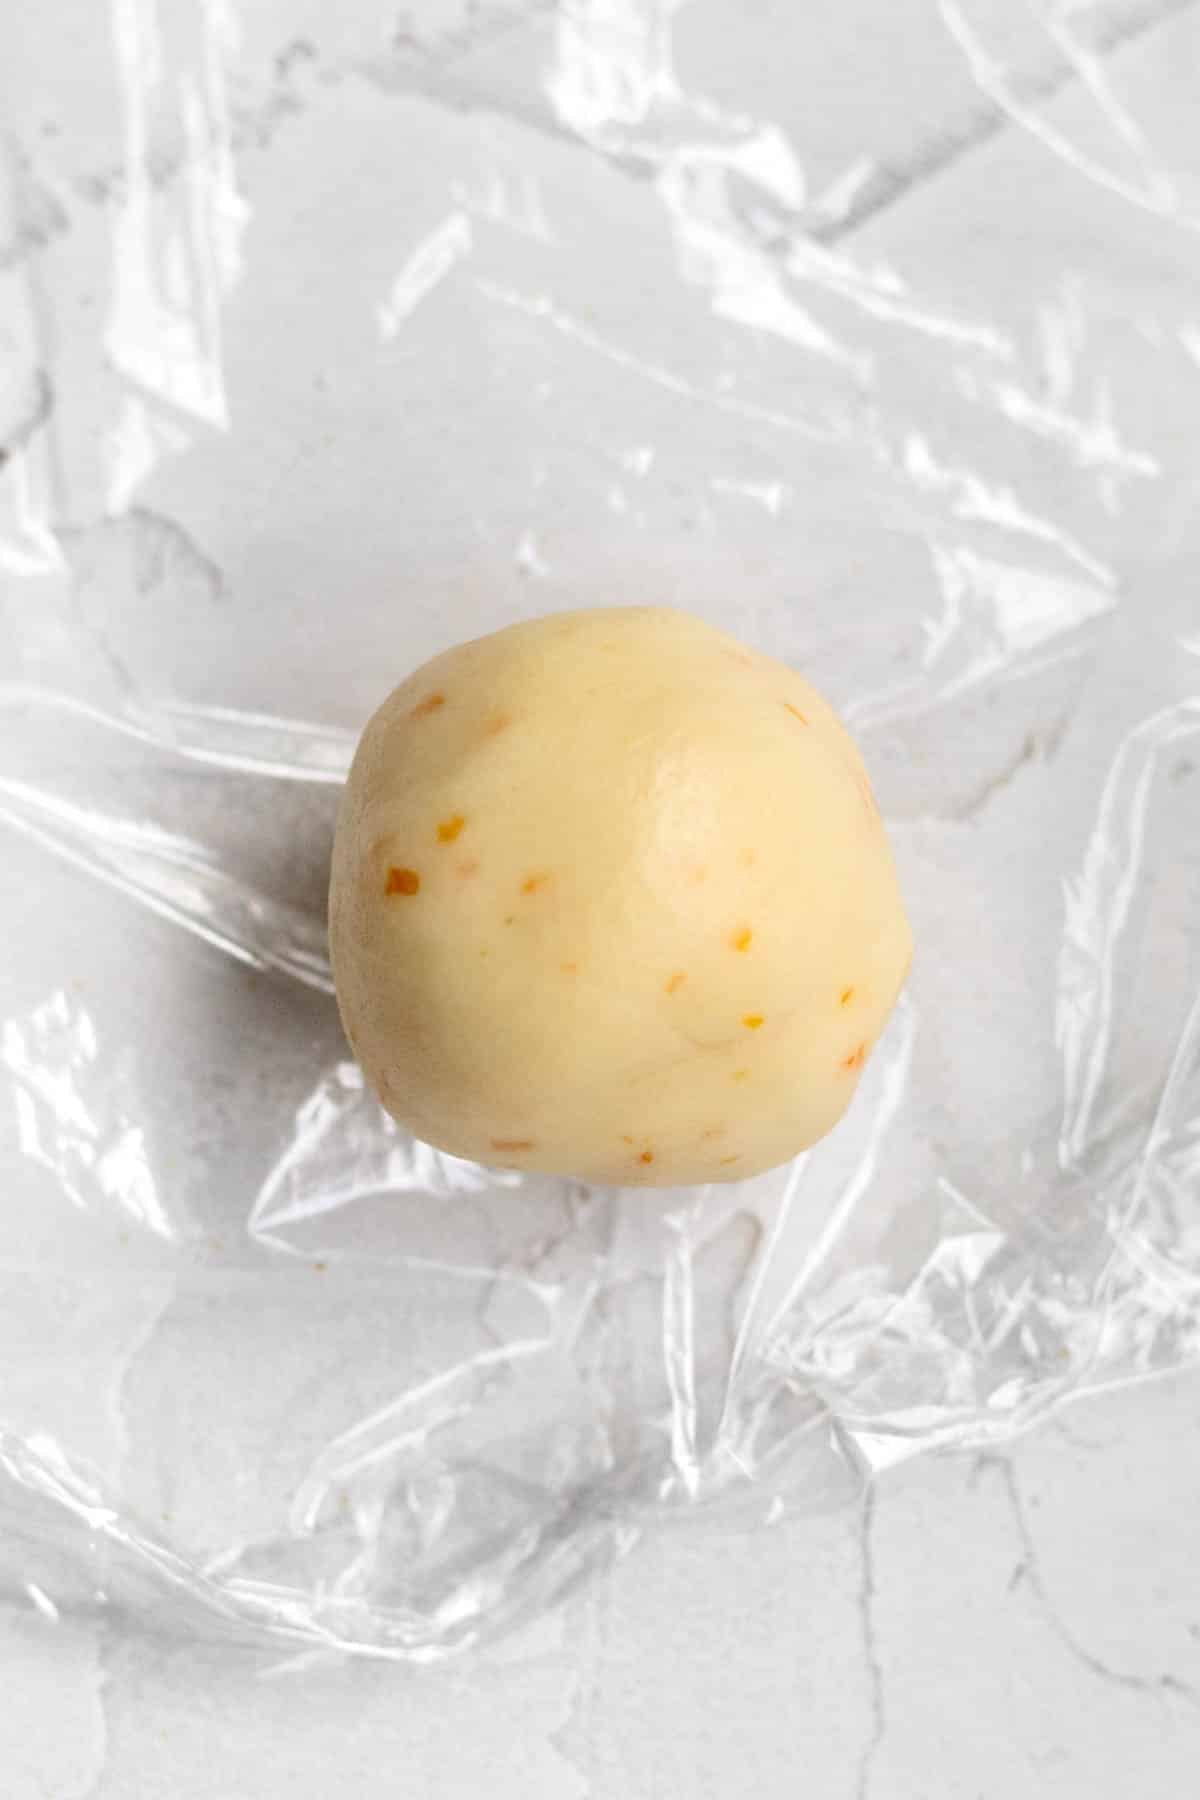 A scooped ball of Orange Shortbread Cookie Dough.